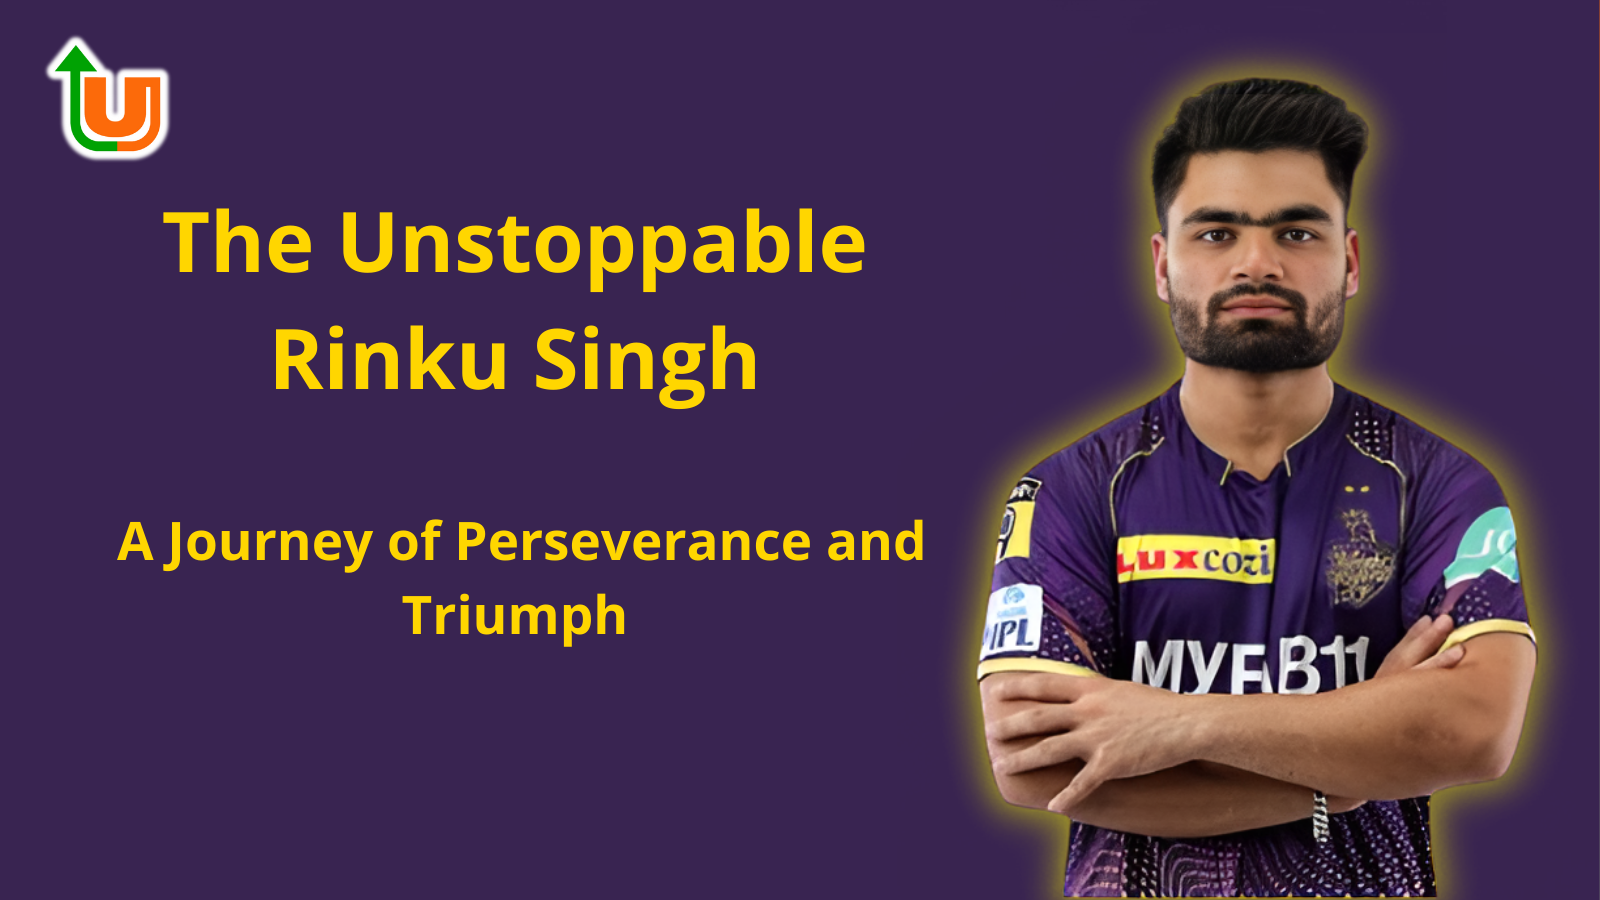 The Unstoppable Rinku Singh: A Journey of Perseverance and Triumph